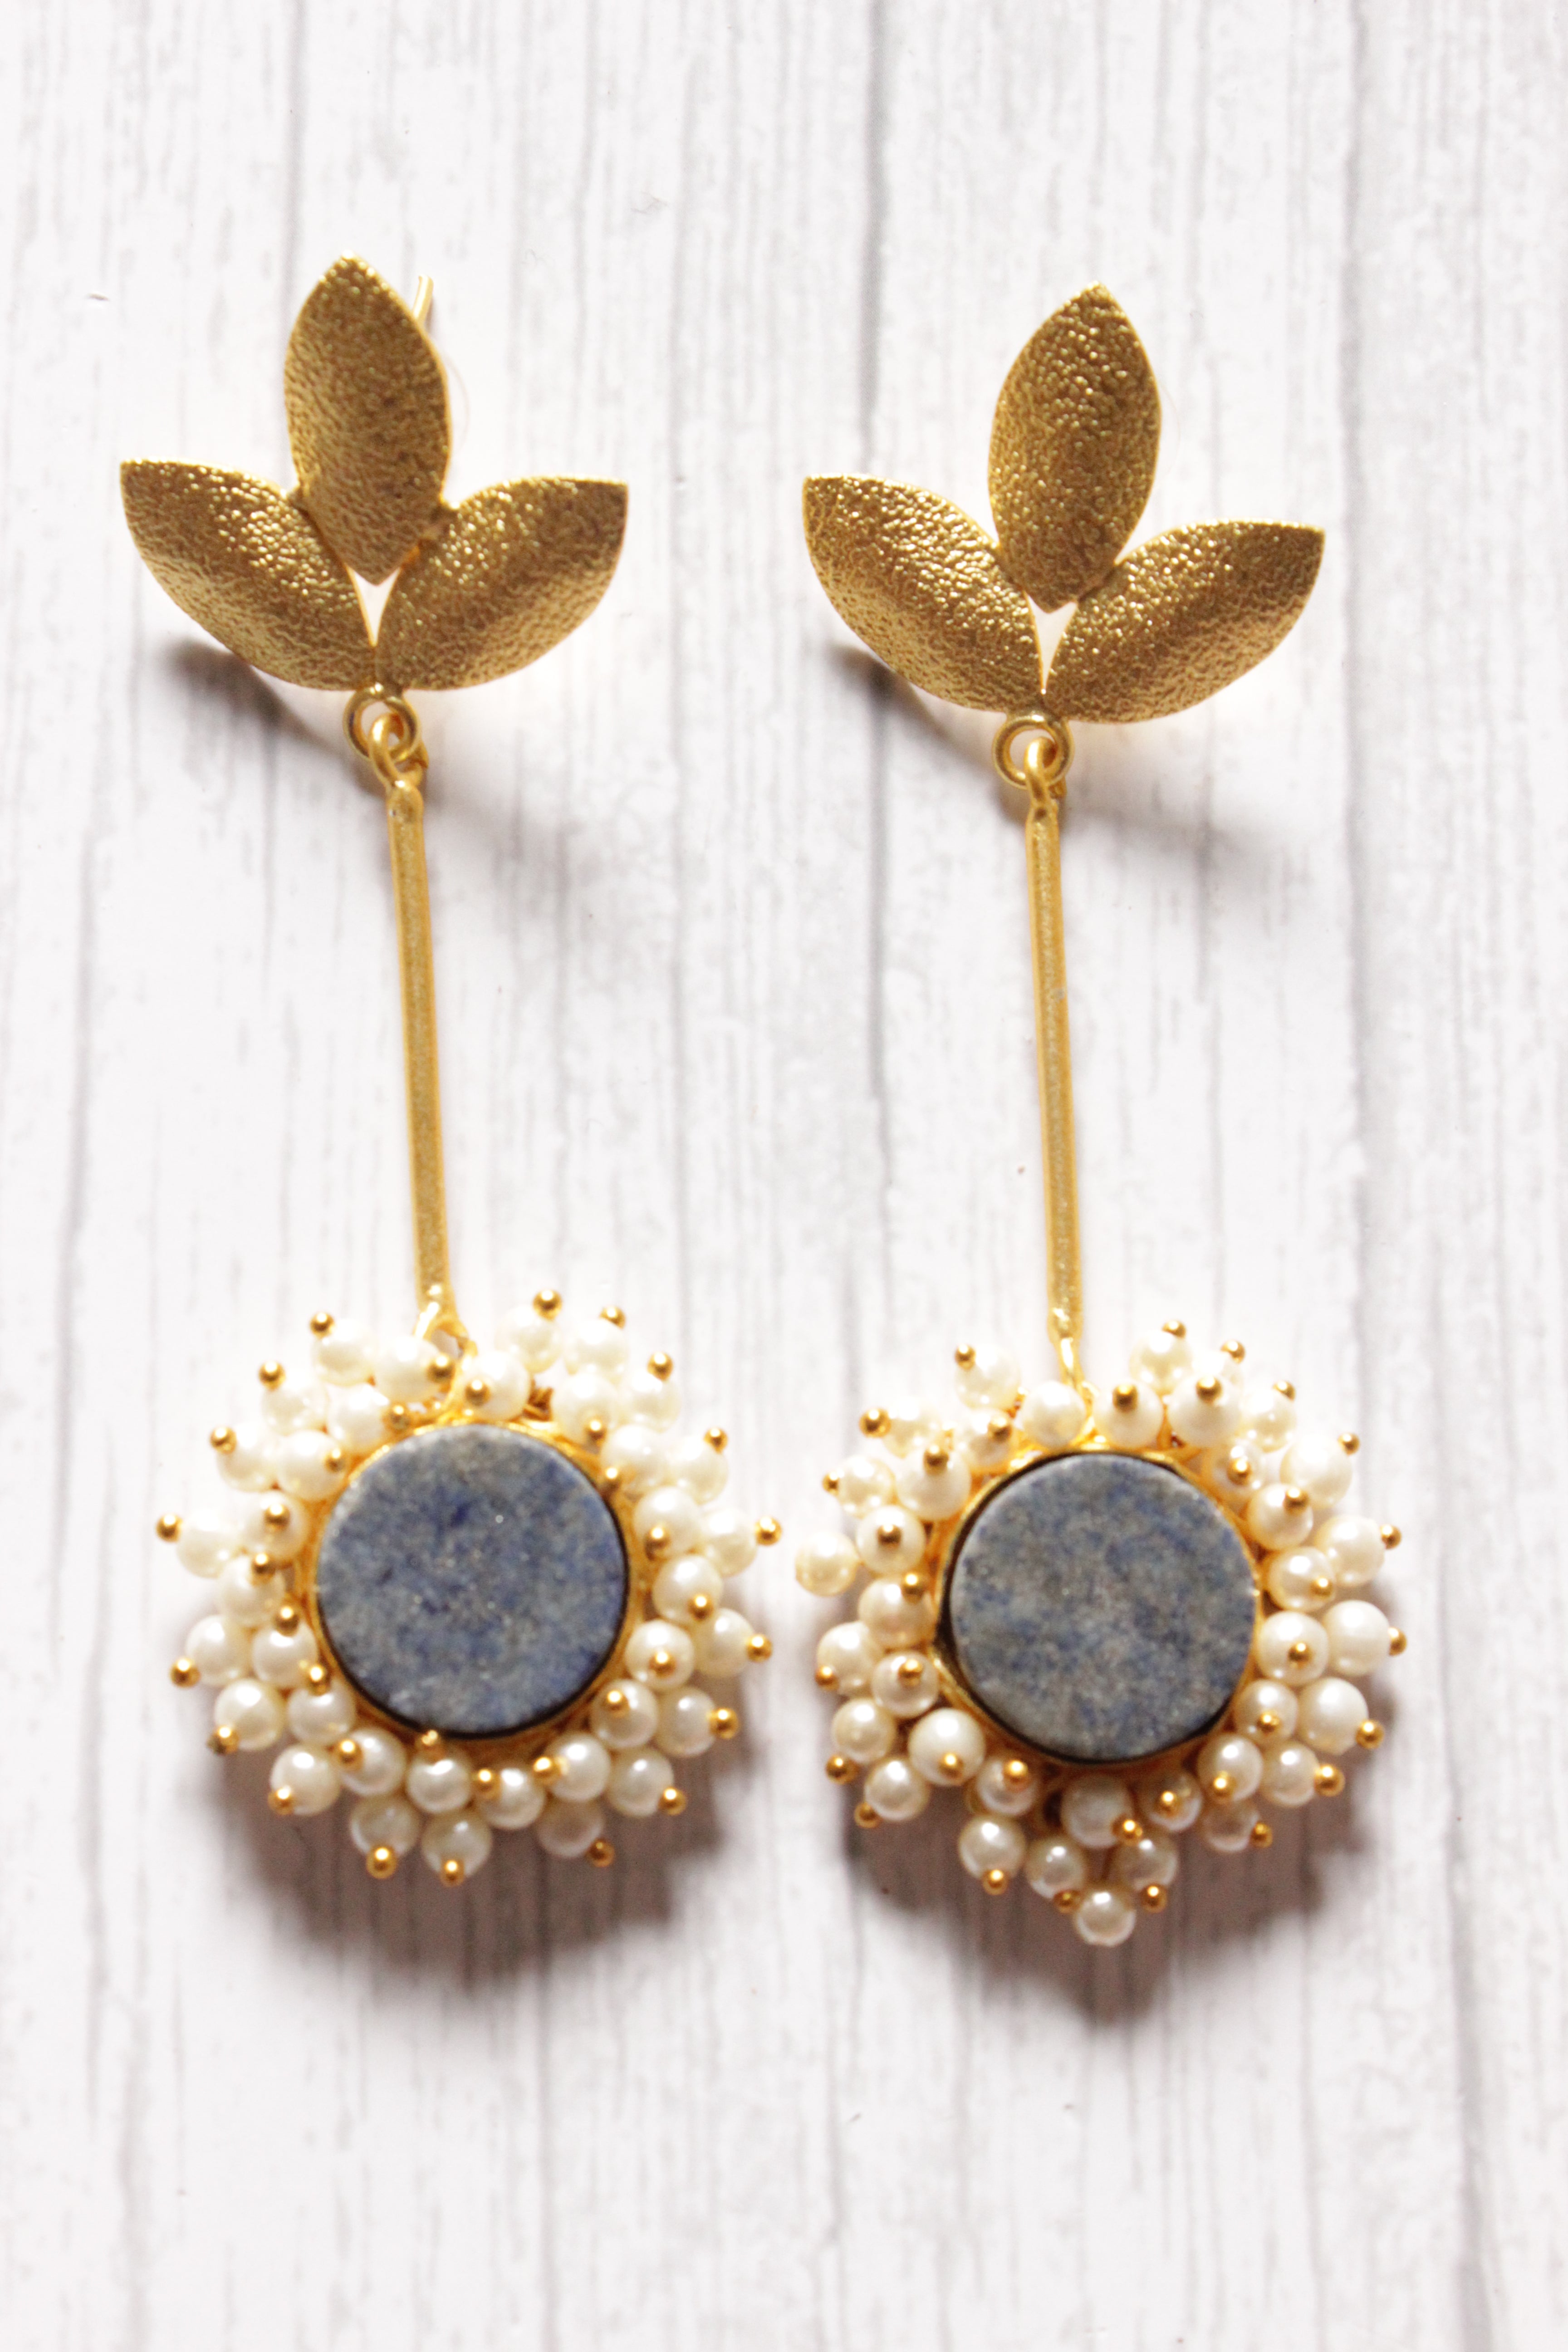 Grey Natural Stones Embedded Brass Dangler Earrings Embellished with White Beads